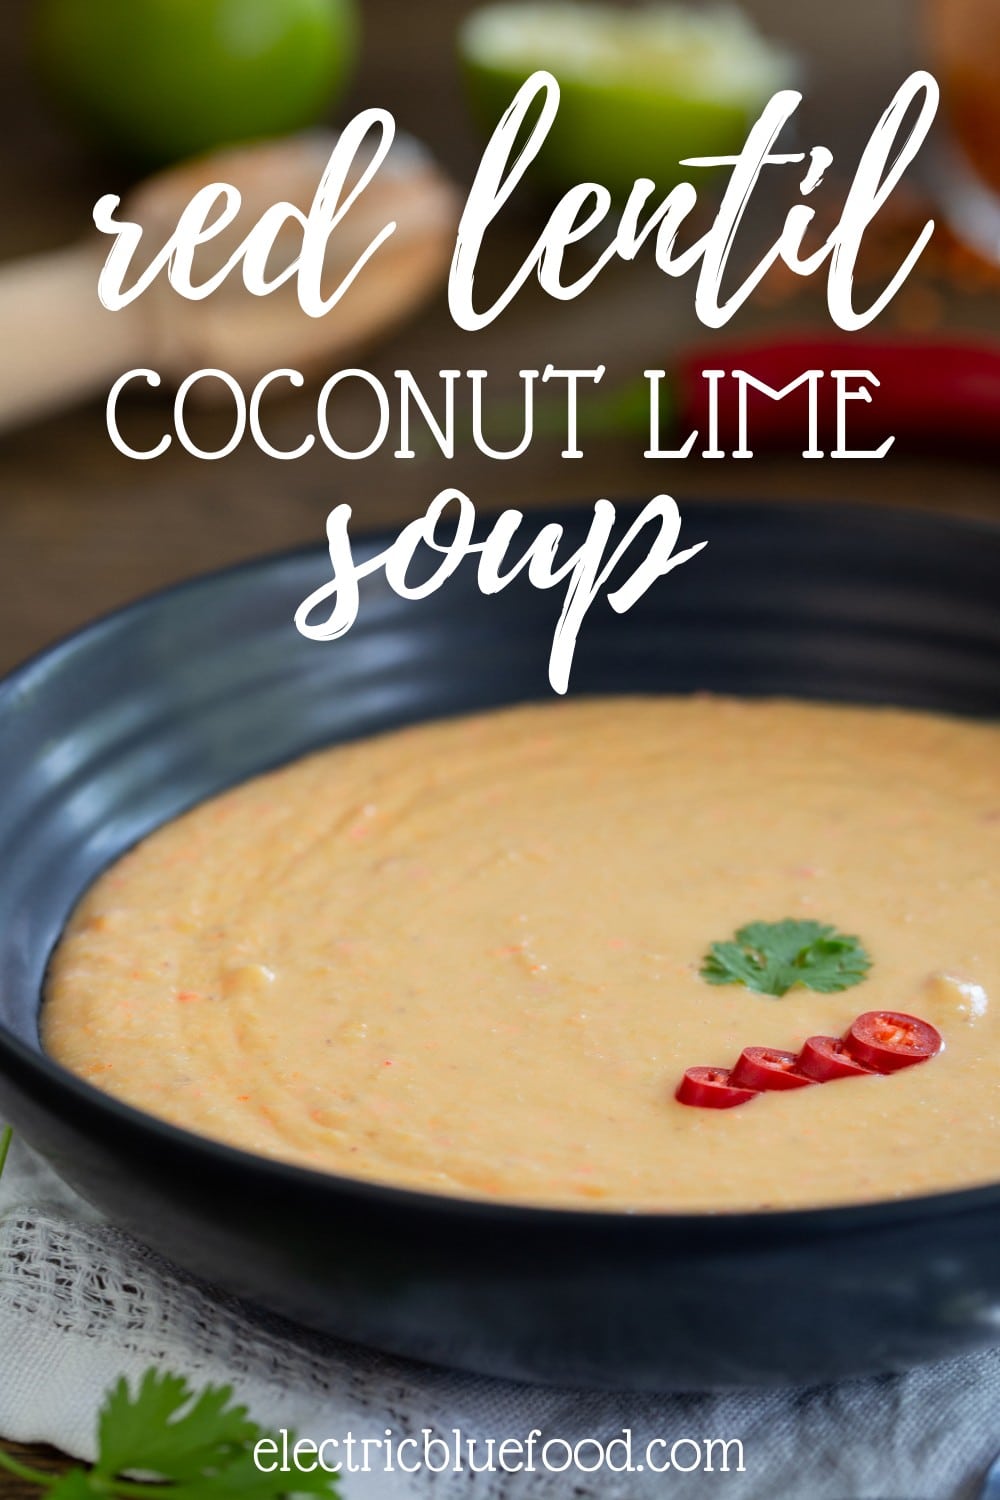 Vegan coconut red lentil soup with lime and chili. Ready in 30 minutes, this soup is entirely plant-based. A spicy blended soup inspired by the flavours of East Asian cuisine.